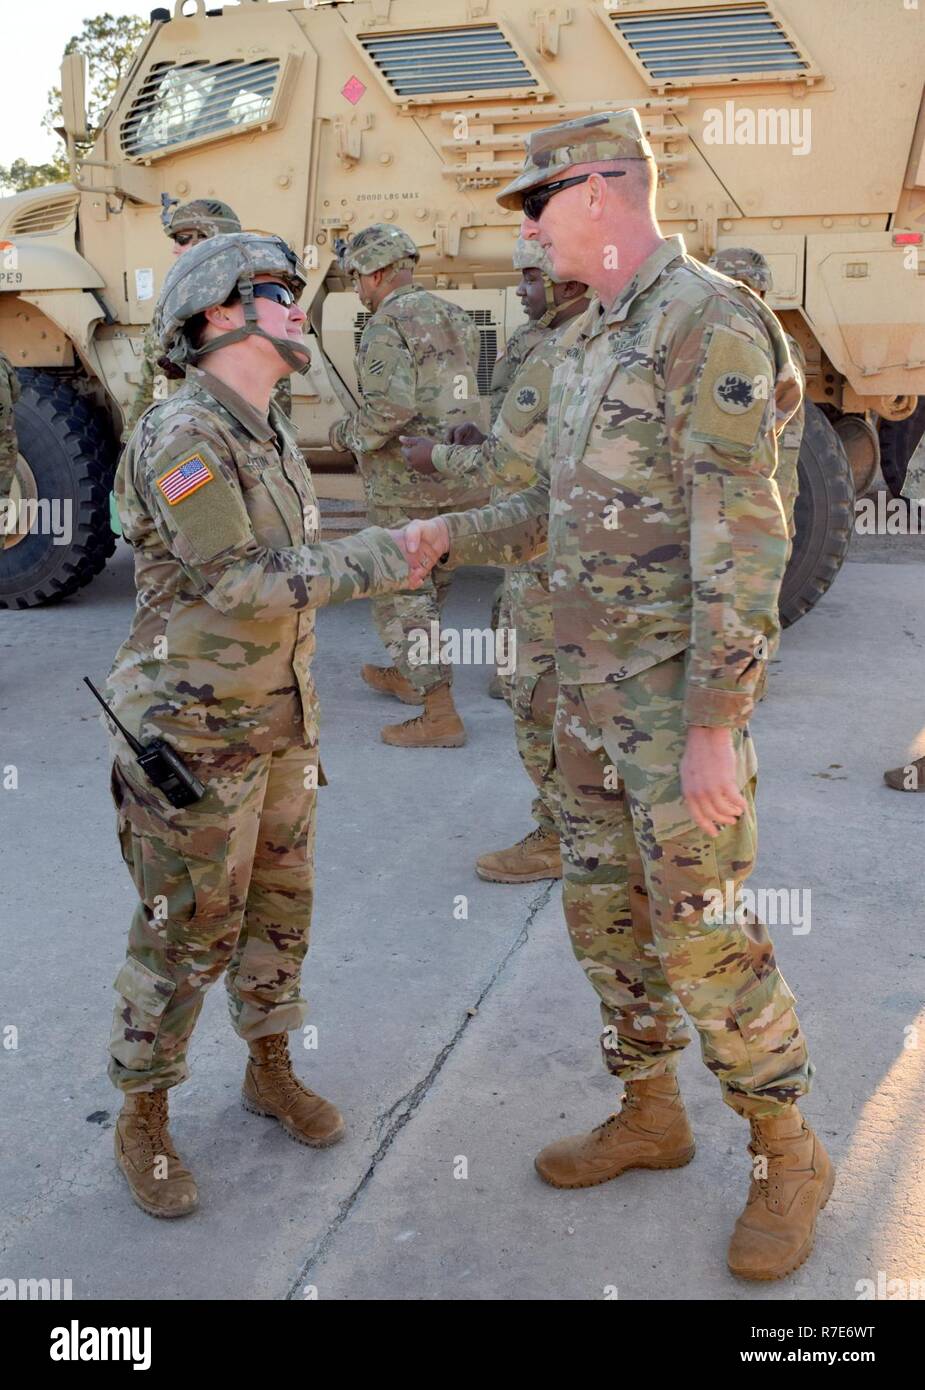 Brigadier General Randall Simmons, commander of the Georgia Army National Guard, presents a coin to Sgt. Asia Martin of the Rome, Ga.-based 1160th Transportation Company Dec 5, 2018 at Fort Stewart, Ga. Sergeant Brown provided drivers training on the MaxxPro mine-resistant ambush-protected vehicle to Soldiers of the 48th Brigade Combat Team. The 48th IBCT is preparing for its fourth combat deployment since September 11, 2001. Stock Photo